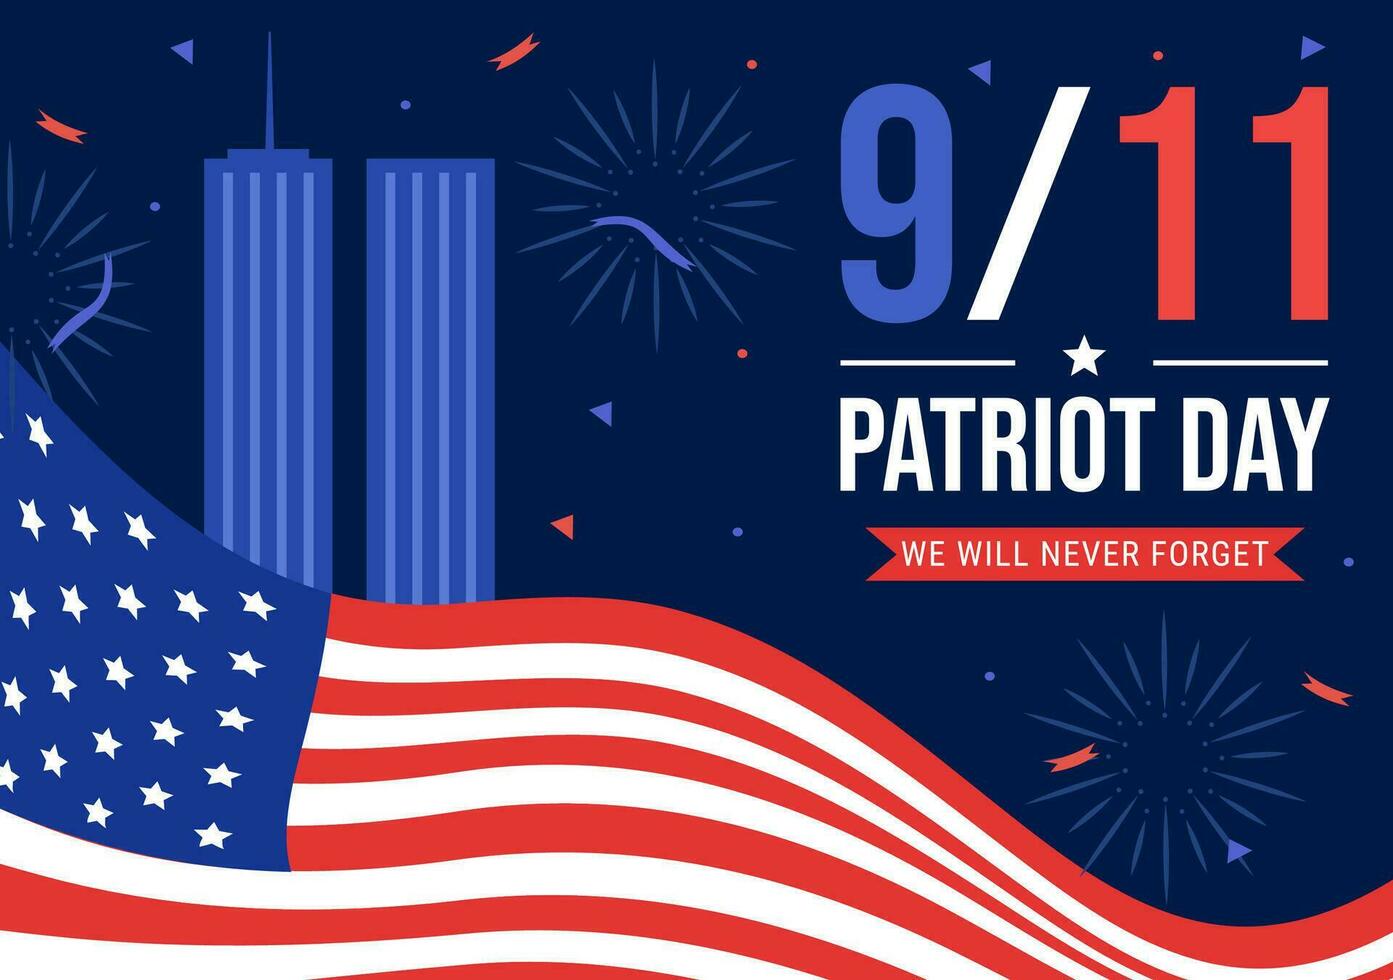 Happy USA Patriot Day Vector Illustration with United States Flag, 911 Memorial and We Will Never Forget Background Design Hand Drawn Templates